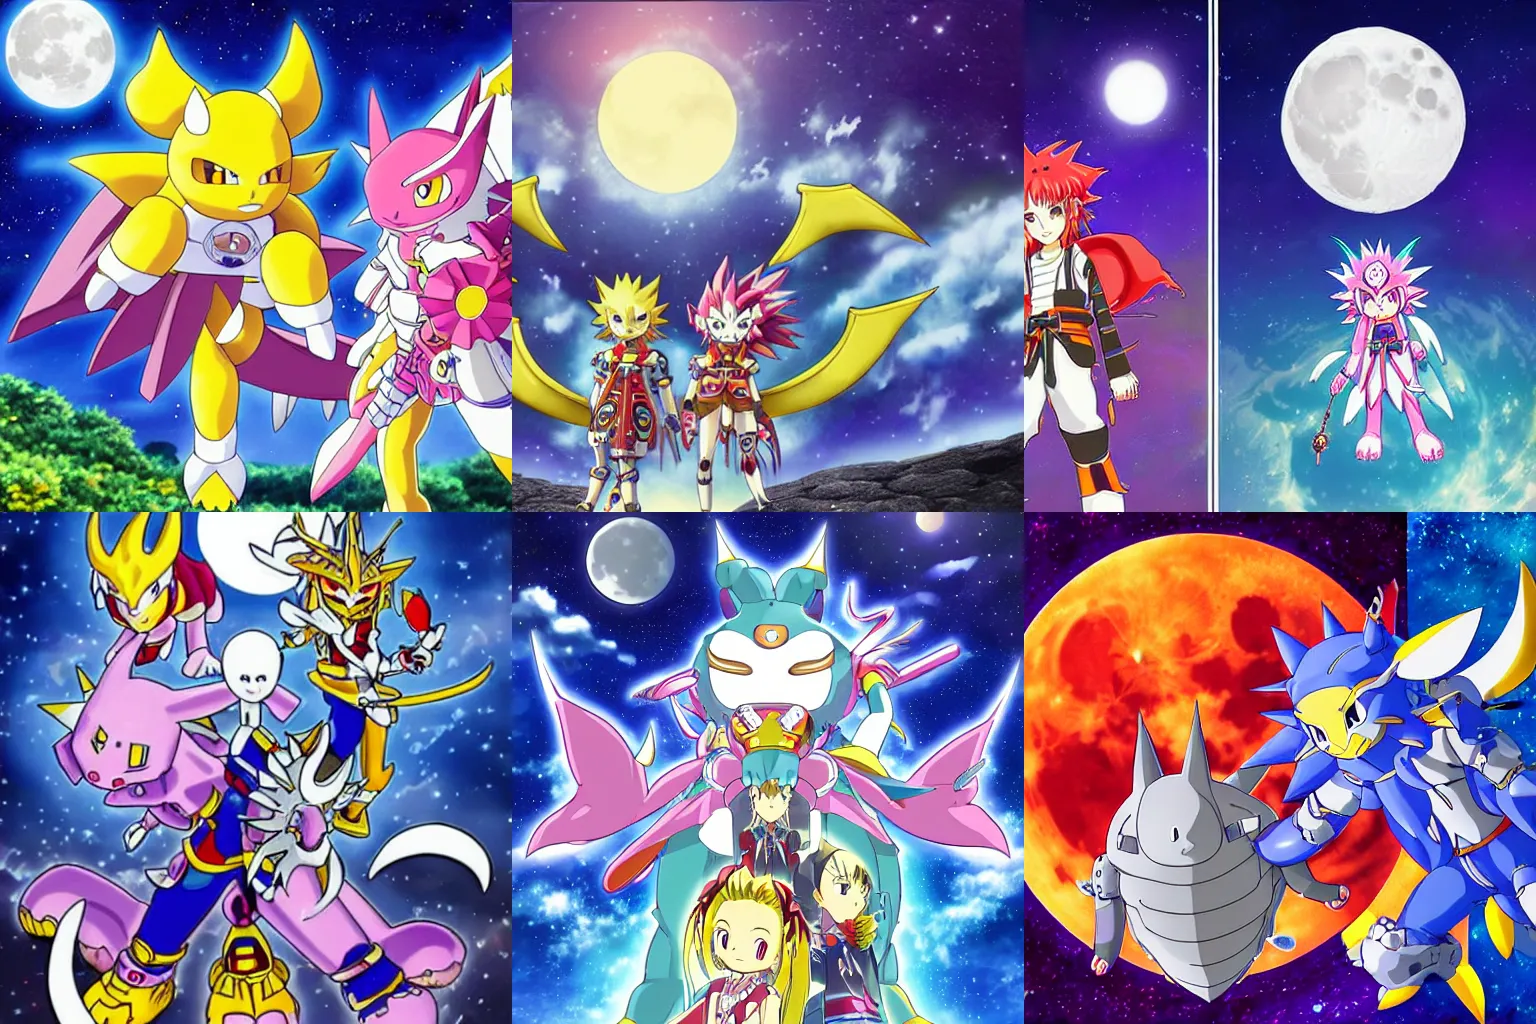 Prompt: sakuyamon and dianamon in front of the moon, night time, moonlight, digimon key art